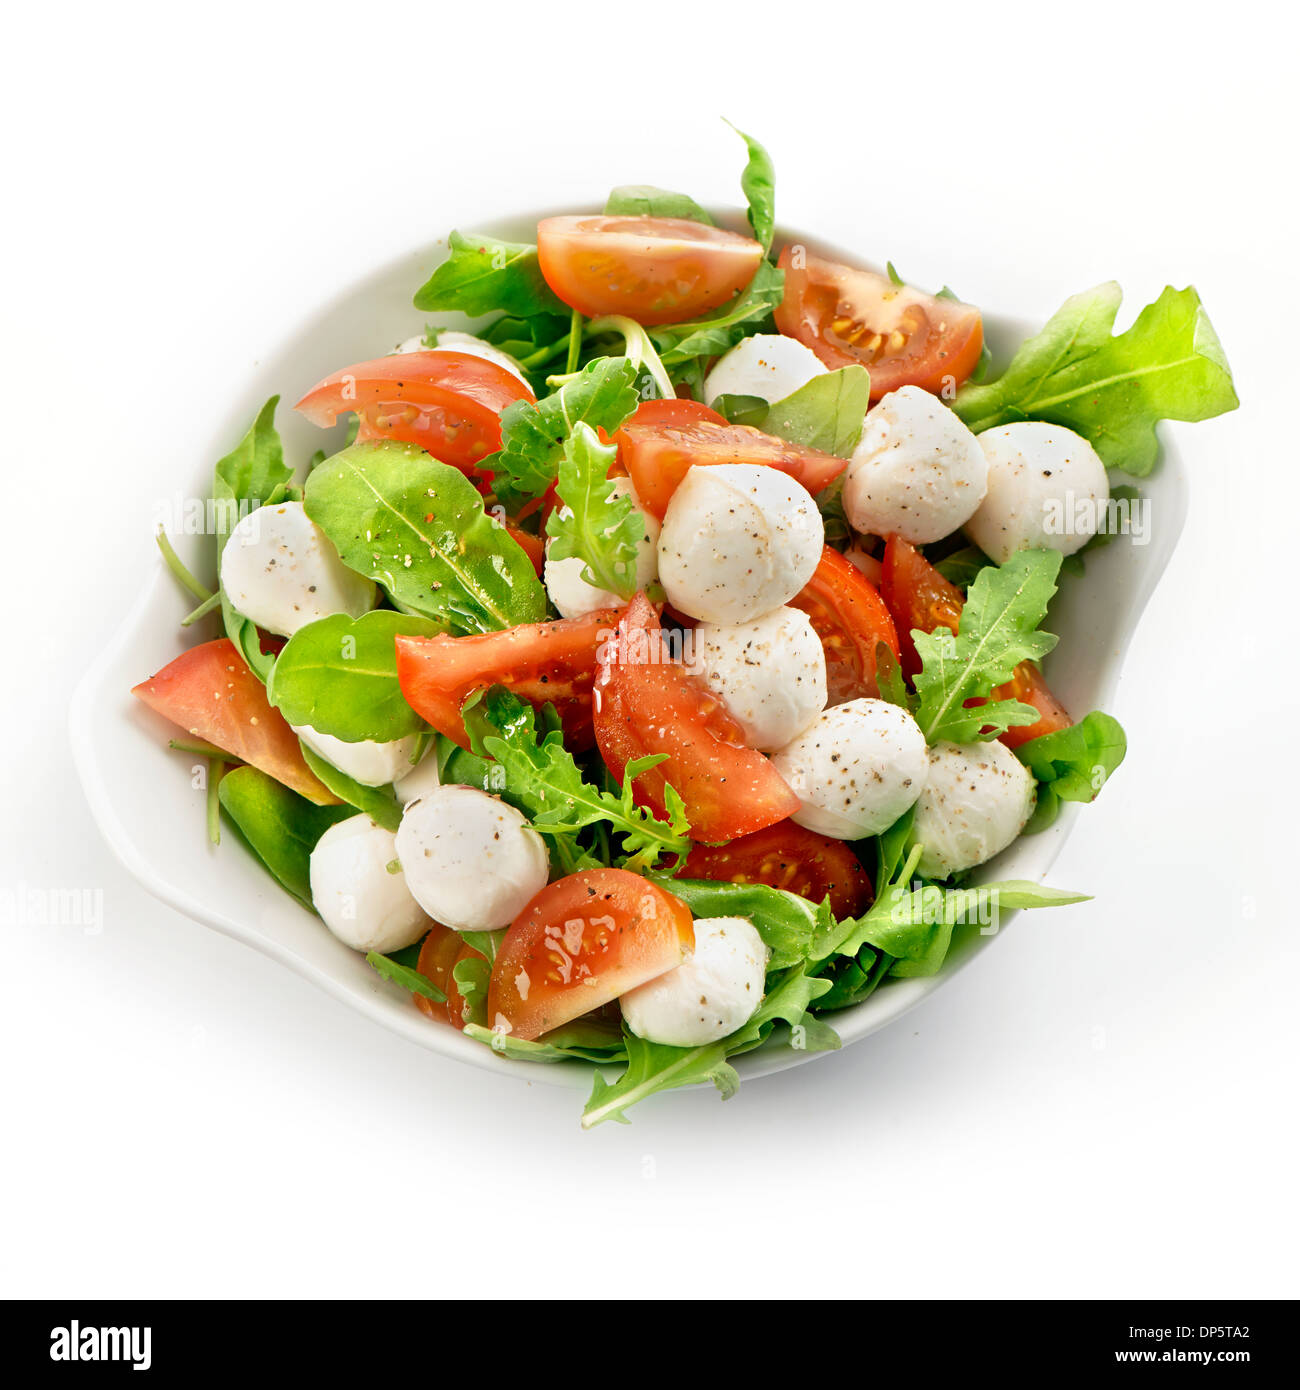 Fresh and healthy salad with tomato mozzarella and lettuce served in a white bowl with a soft shadow Stock Photo